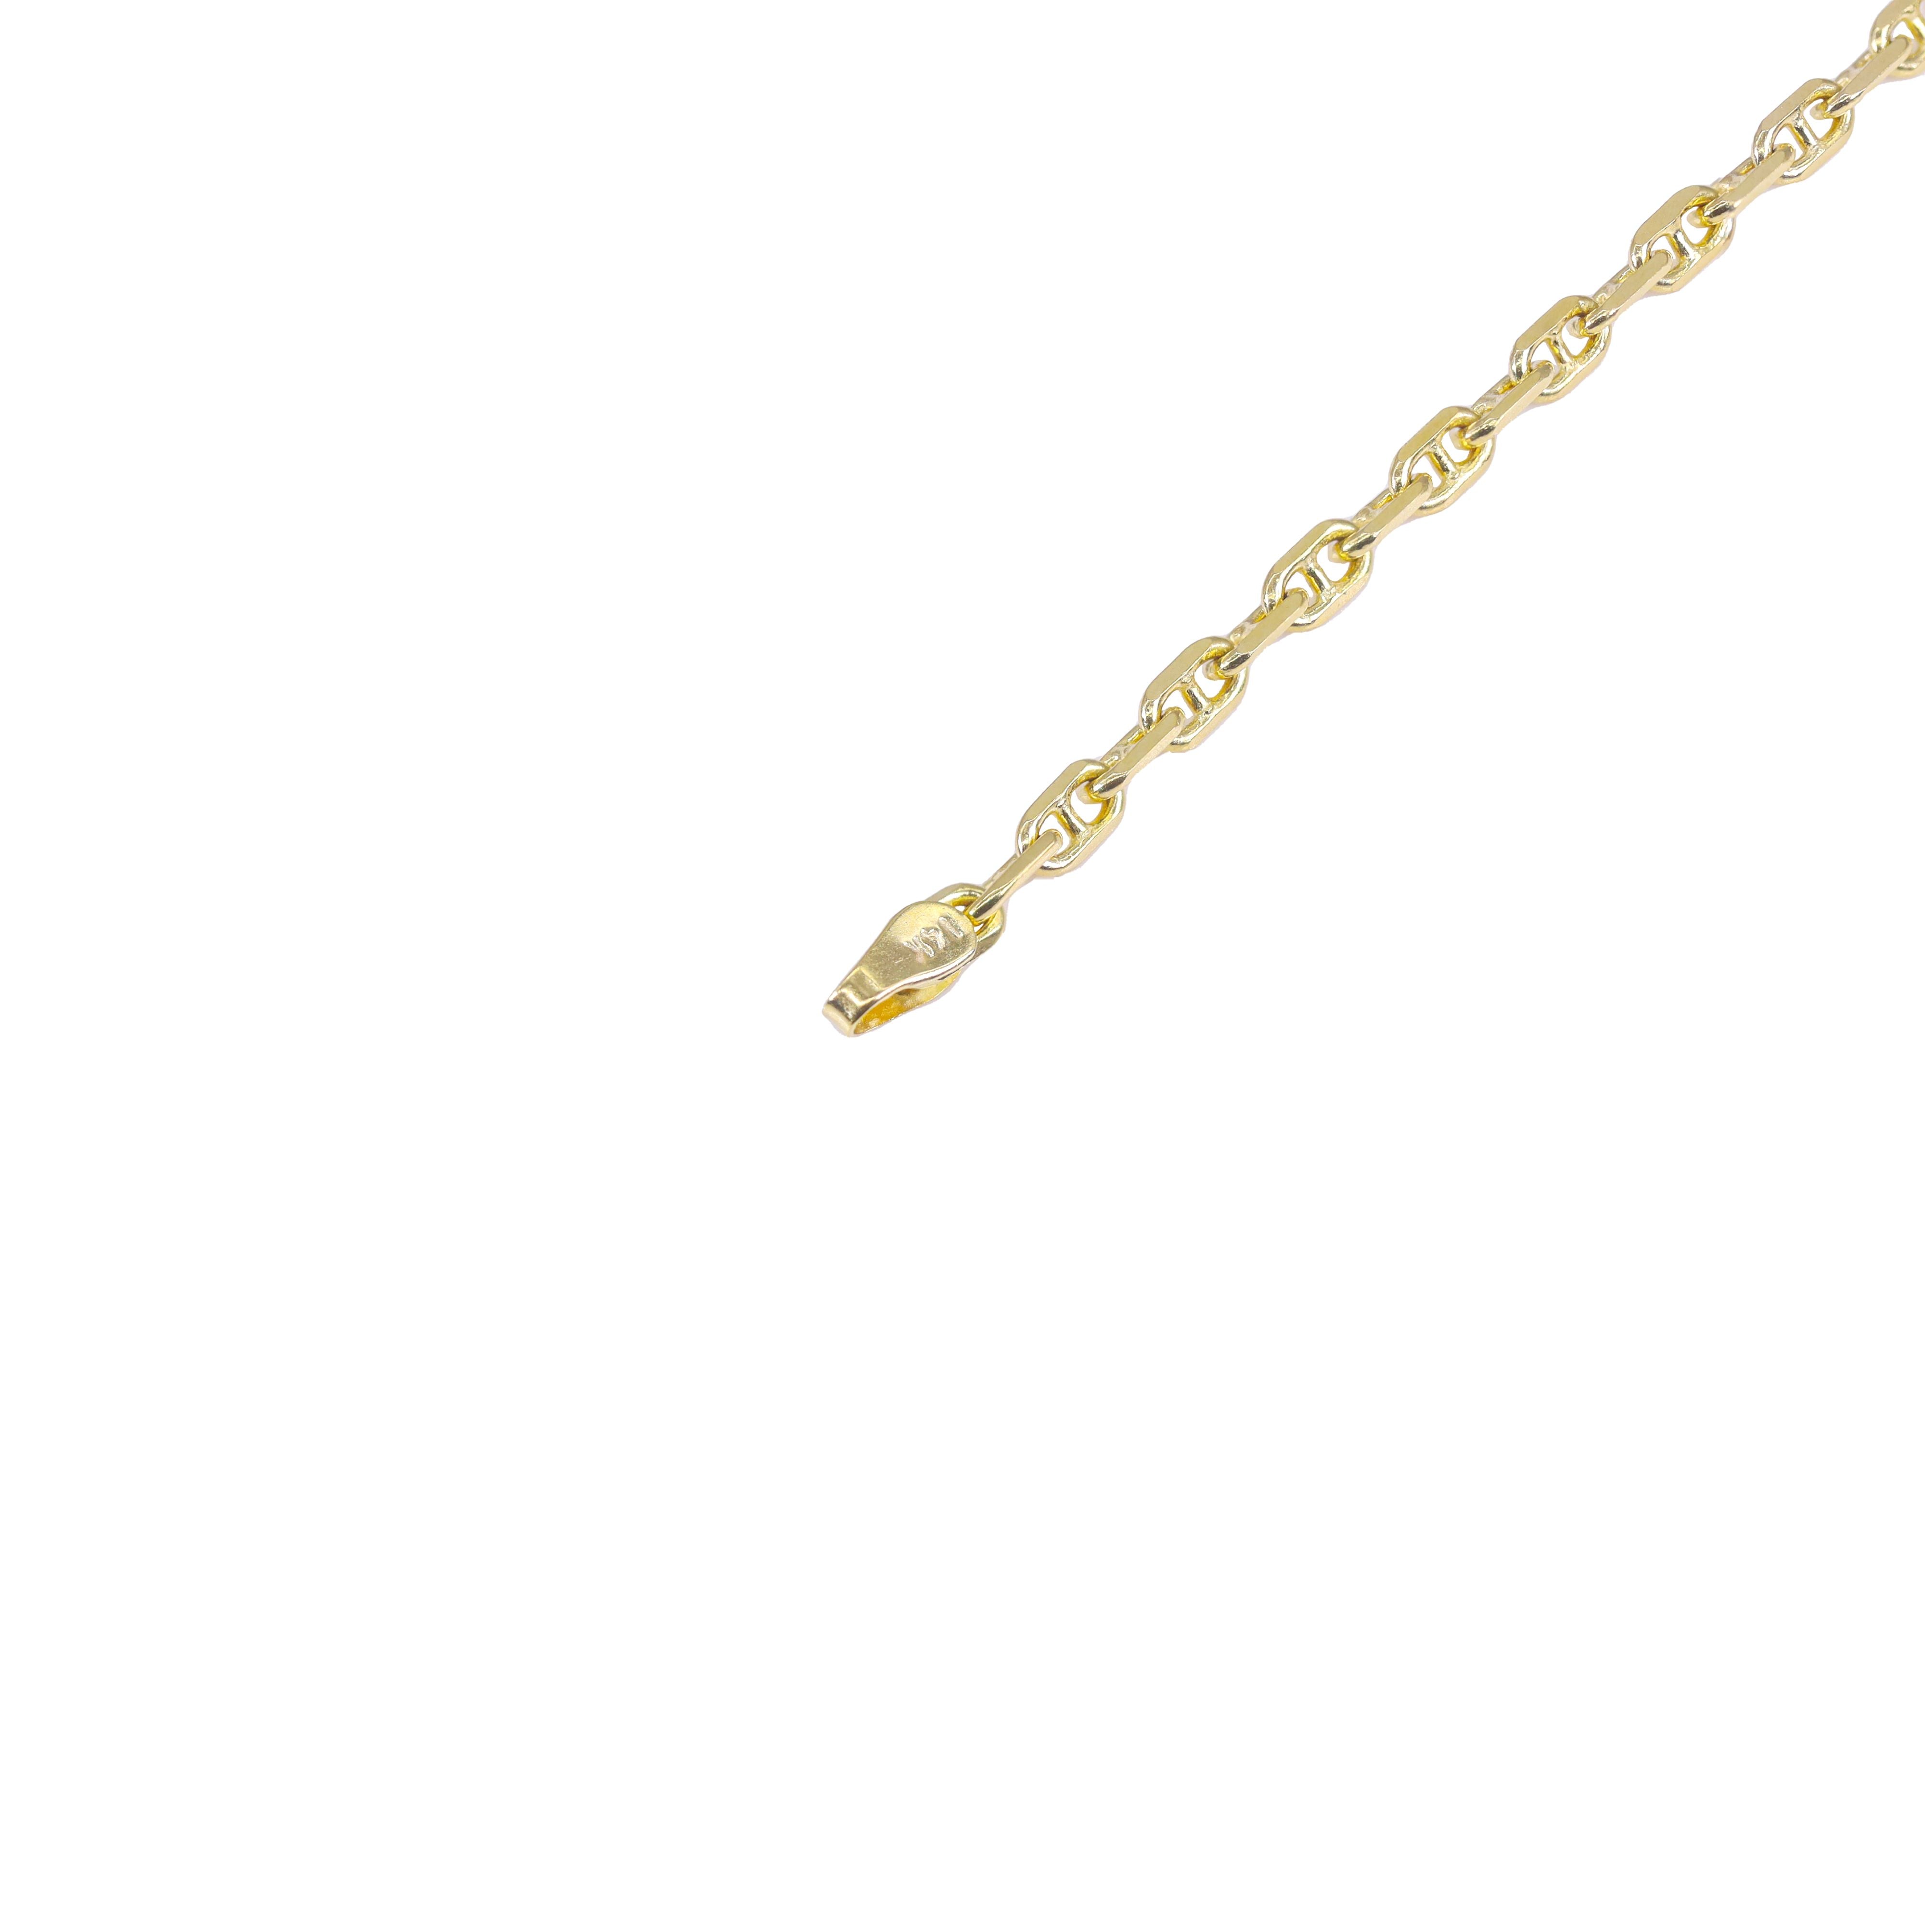 14KT Mariner/Anchor Link Yellow Gold Chain